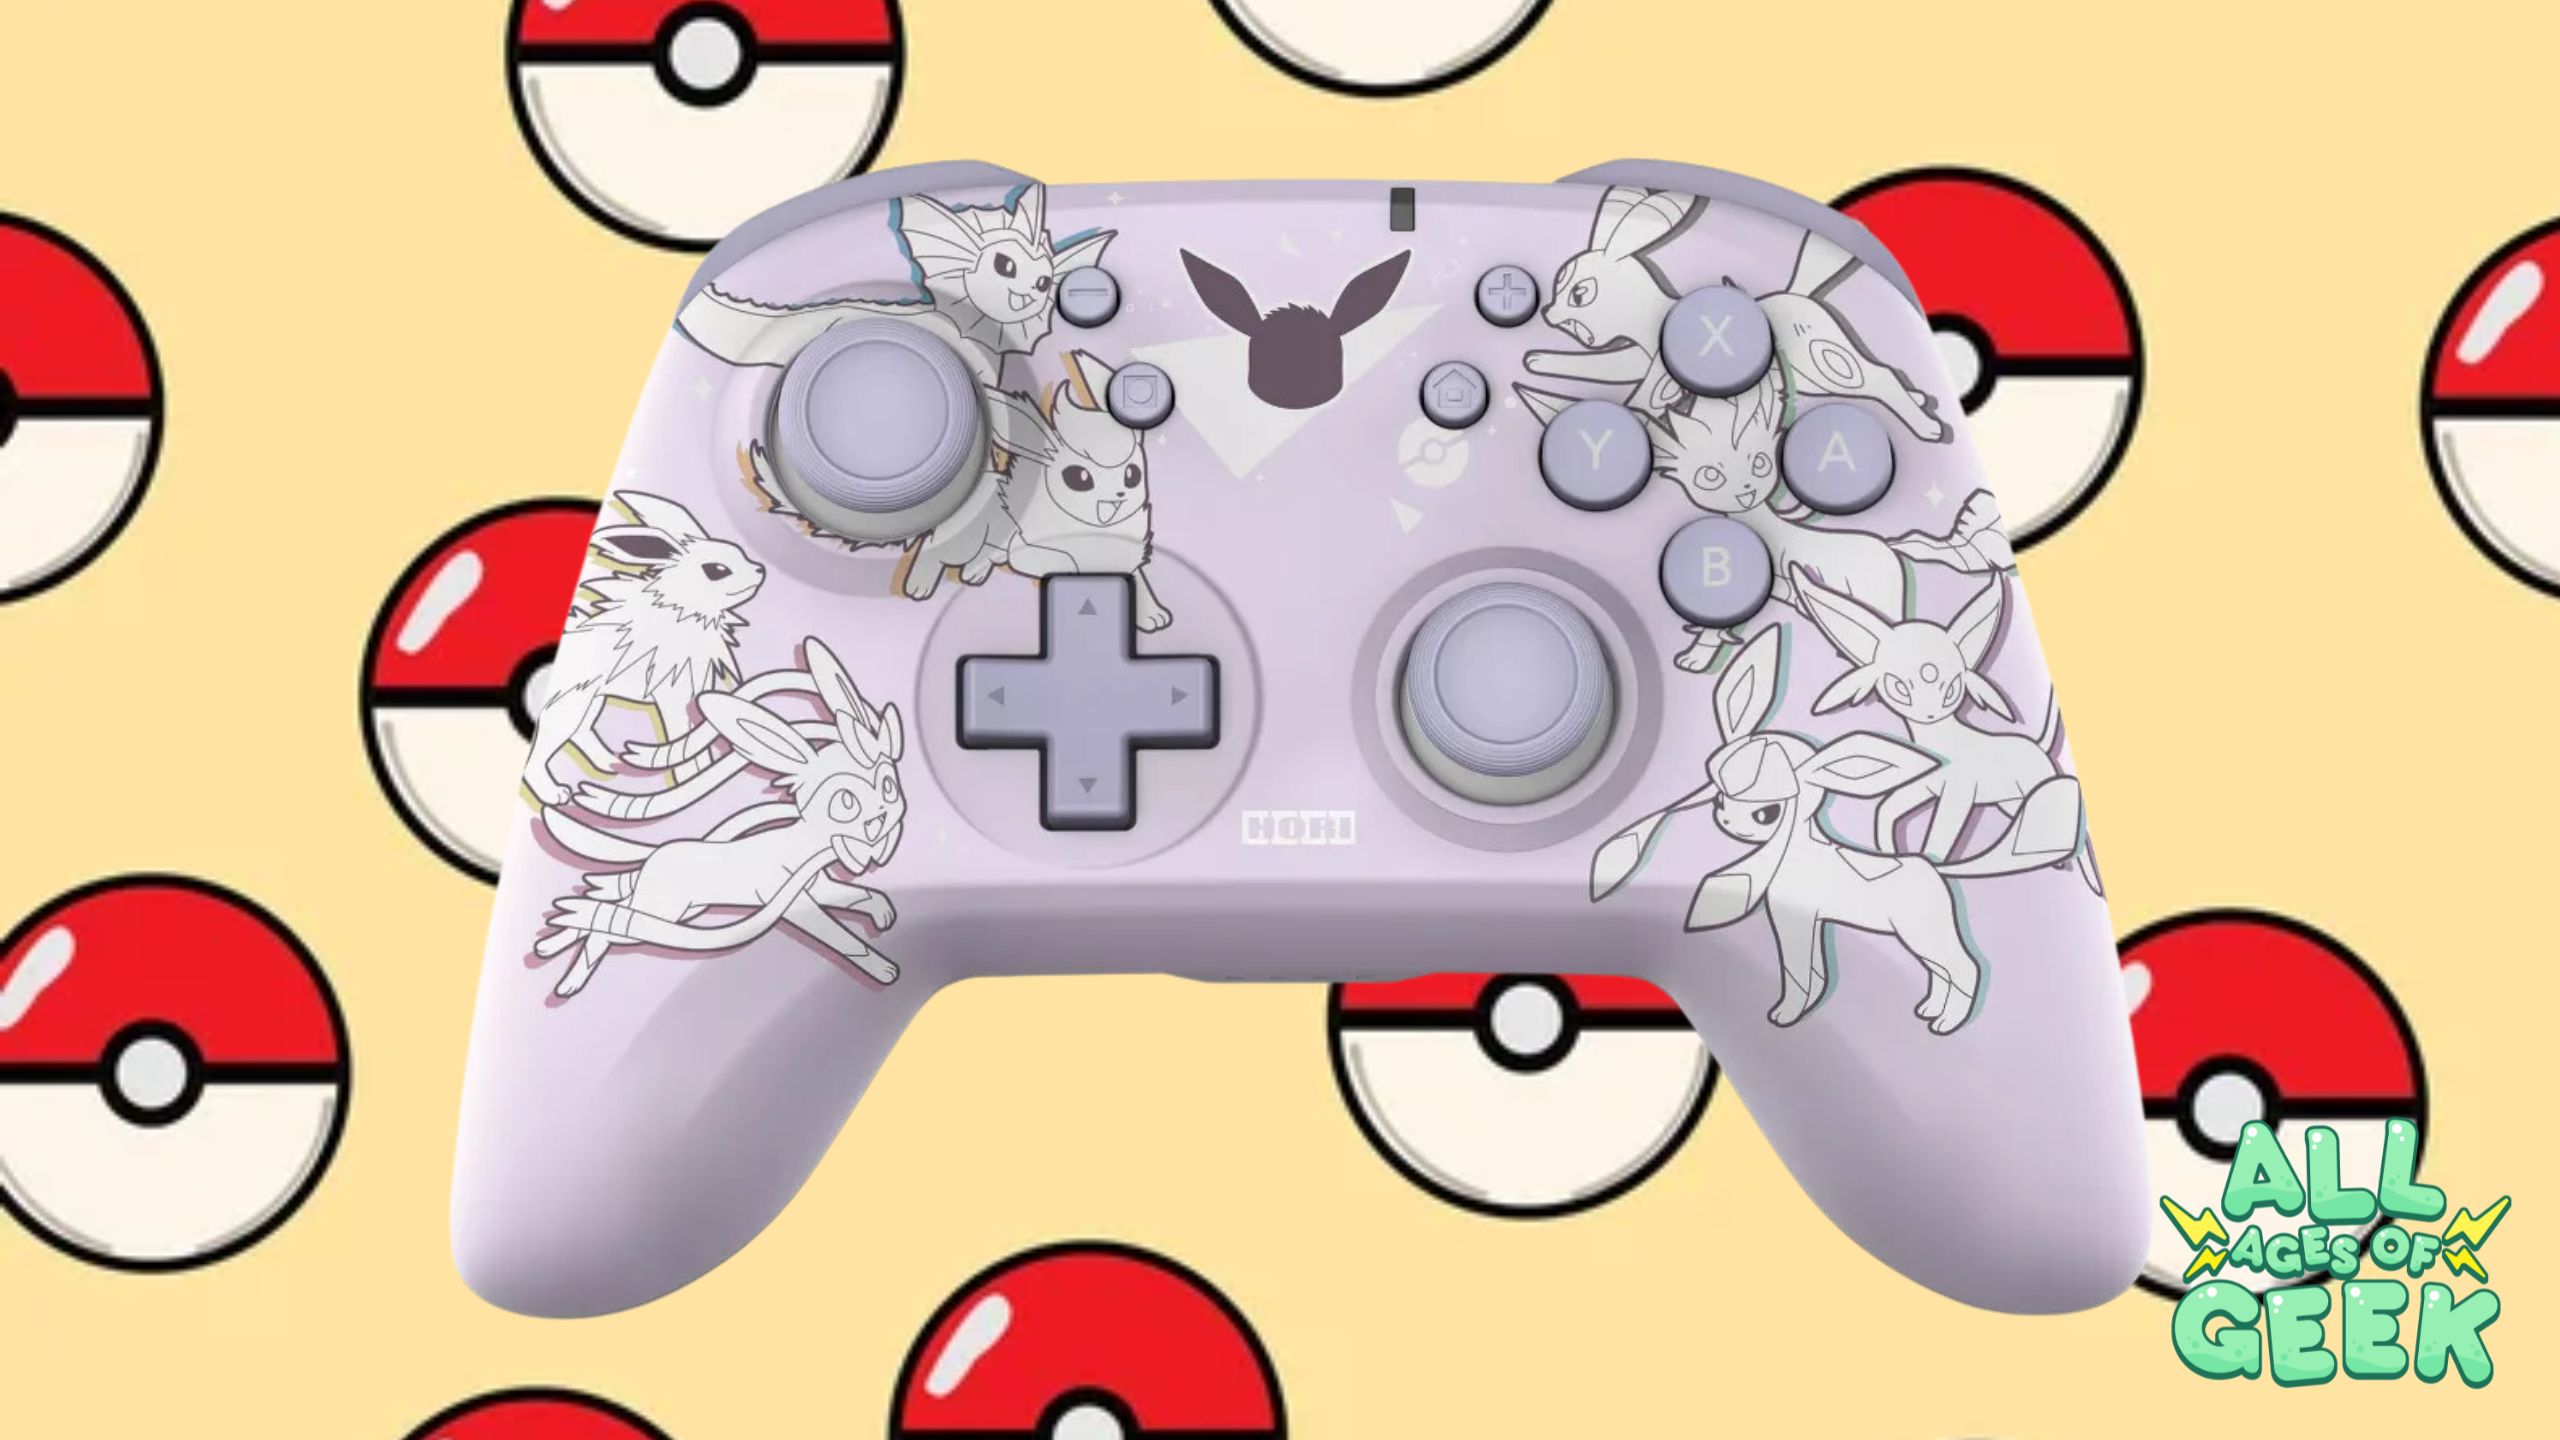 A lavender Nintendo Switch wireless controller adorned with Eevee and its evolutions, including Vaporeon, Jolteon, Flareon, Espeon, Umbreon, Leafeon, Glaceon, and Sylveon, is displayed against a background of Poké Balls on a beige backdrop. The controller features minimalist line art of the Pokémon, along with gray buttons and joysticks. The All Ages of Geek logo is positioned in the bottom right corner, adding a touch of branding to the vibrant and playful image.